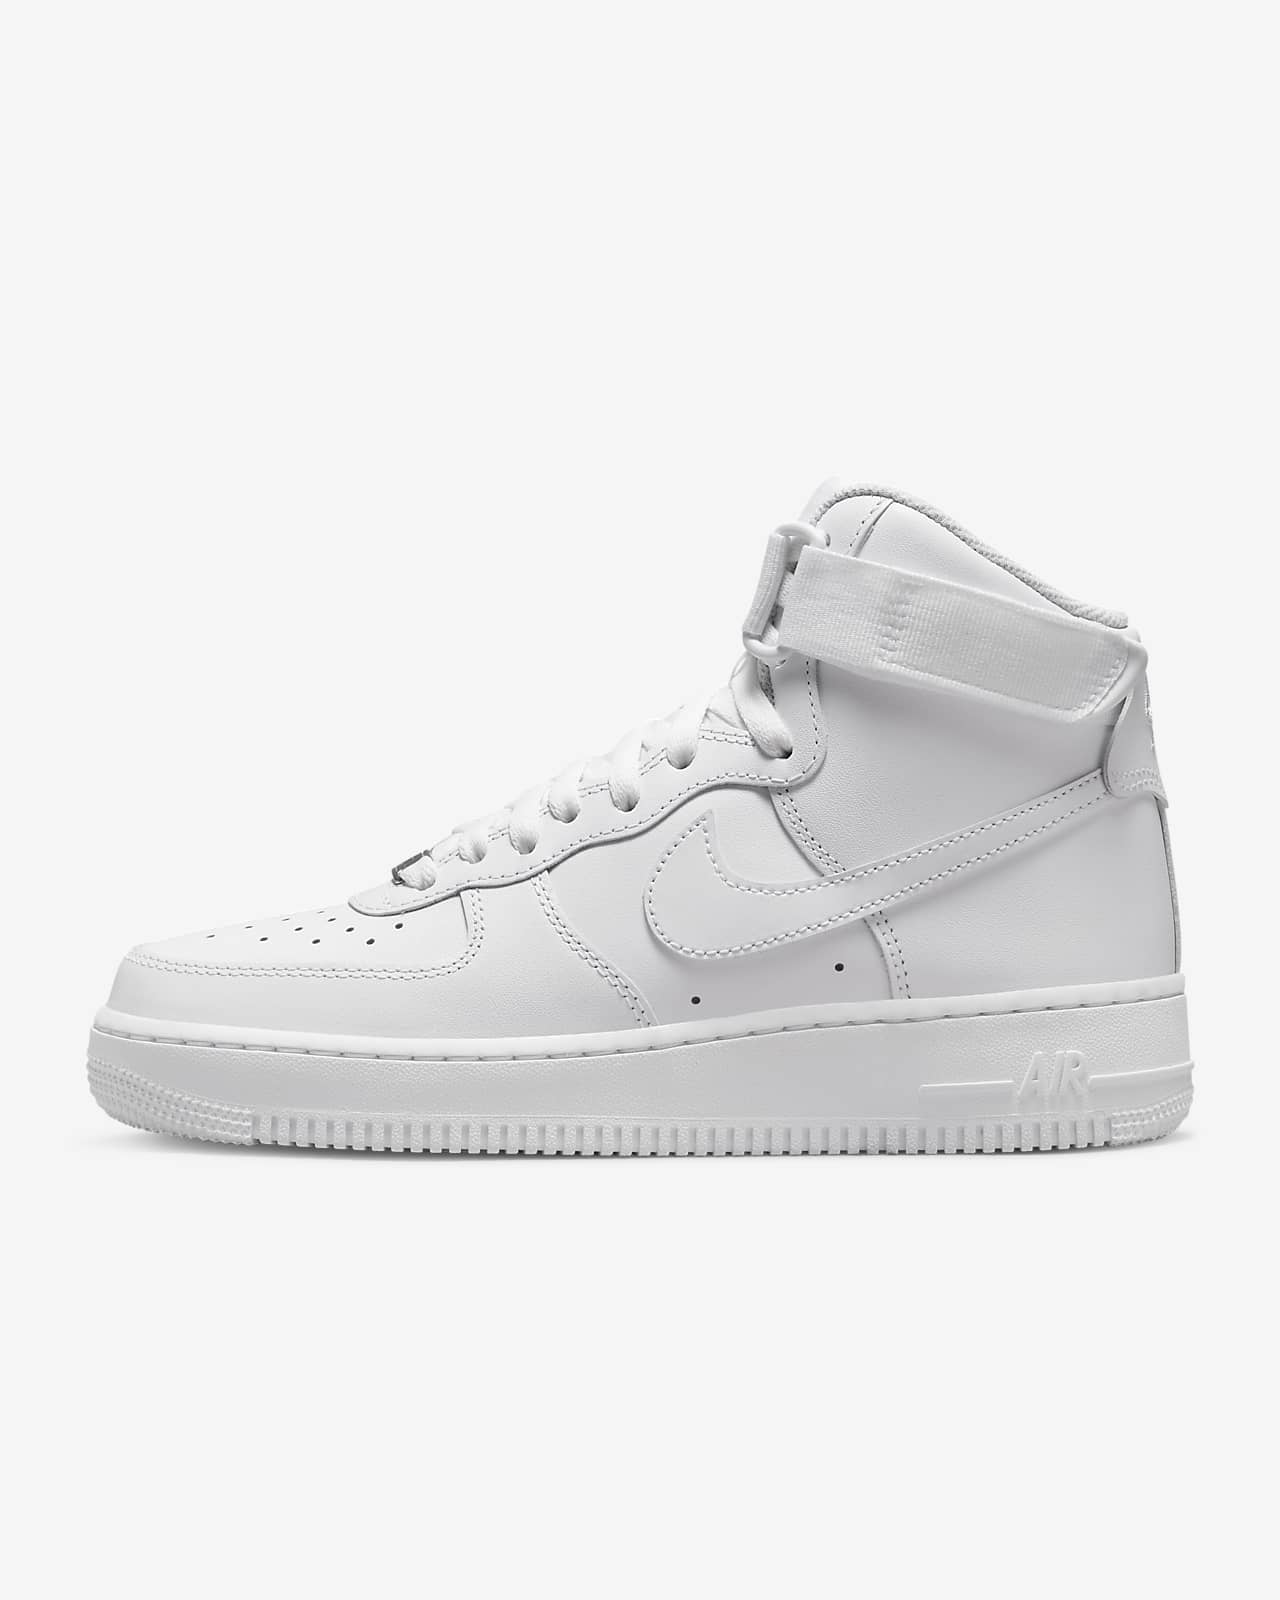 Style Guide: Women's Air Force 1s